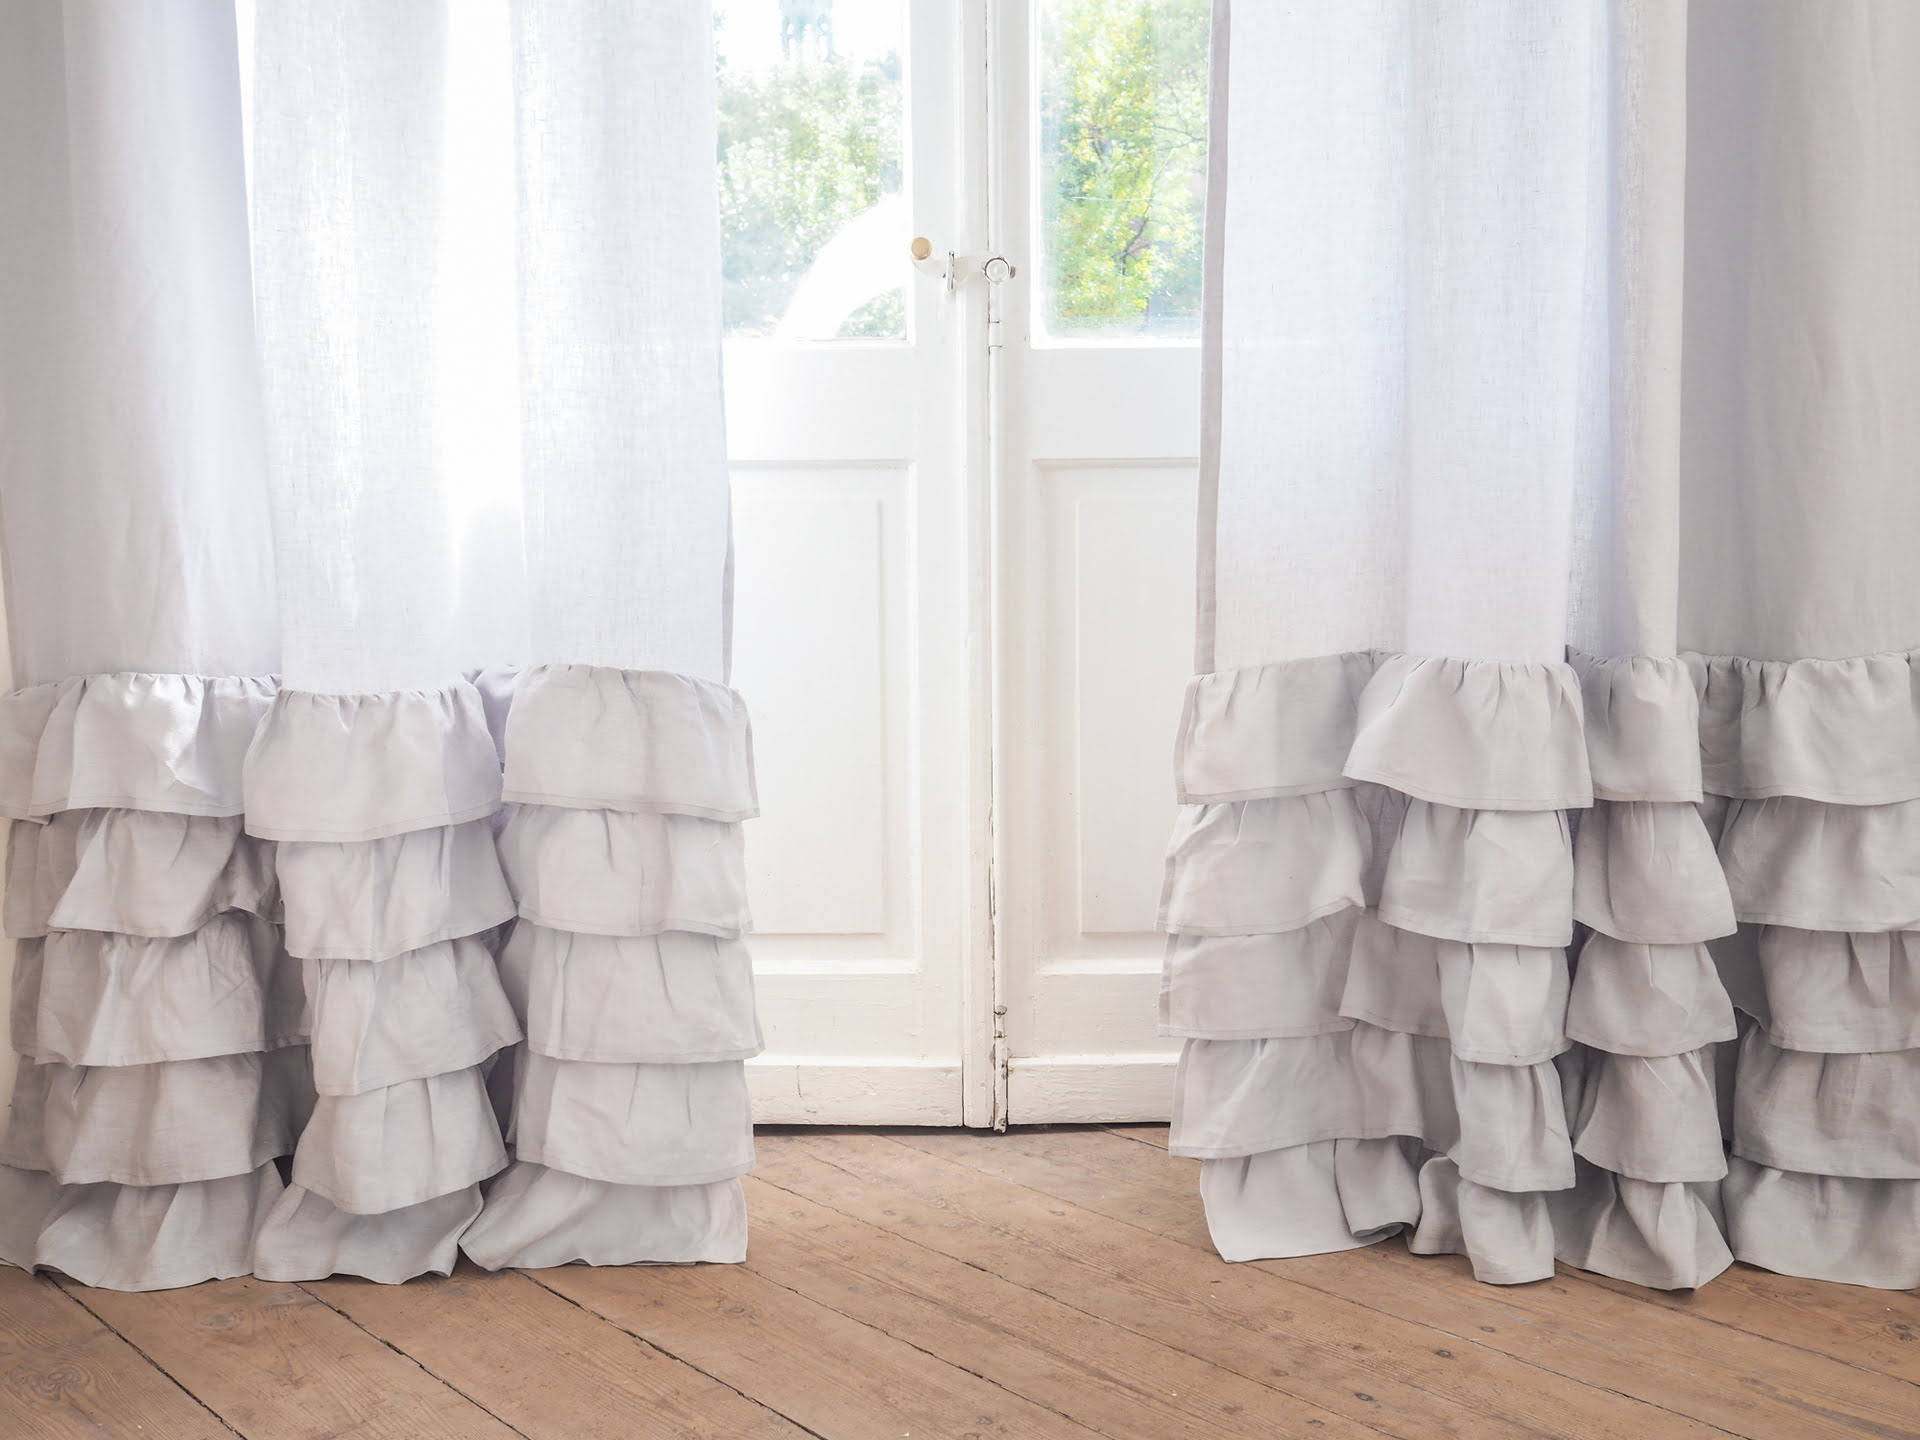 How To Make Ruffle Curtains | Storables